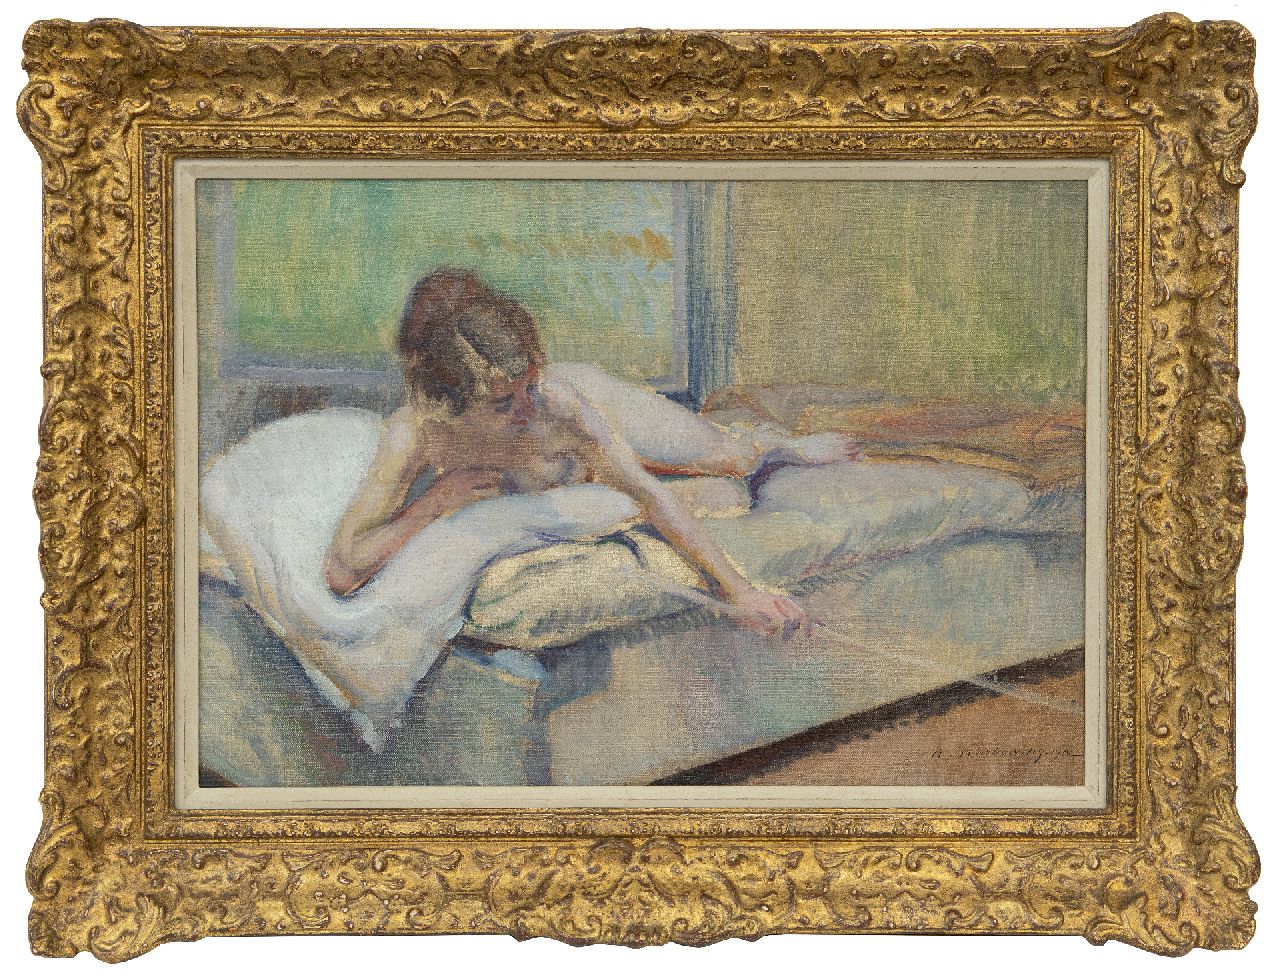 Karbowsky A.  | Adrien Karbowsky, Female nude on a bed, oil on canvas 38.3 x 55.1 cm, signed l.r. and dated 1912